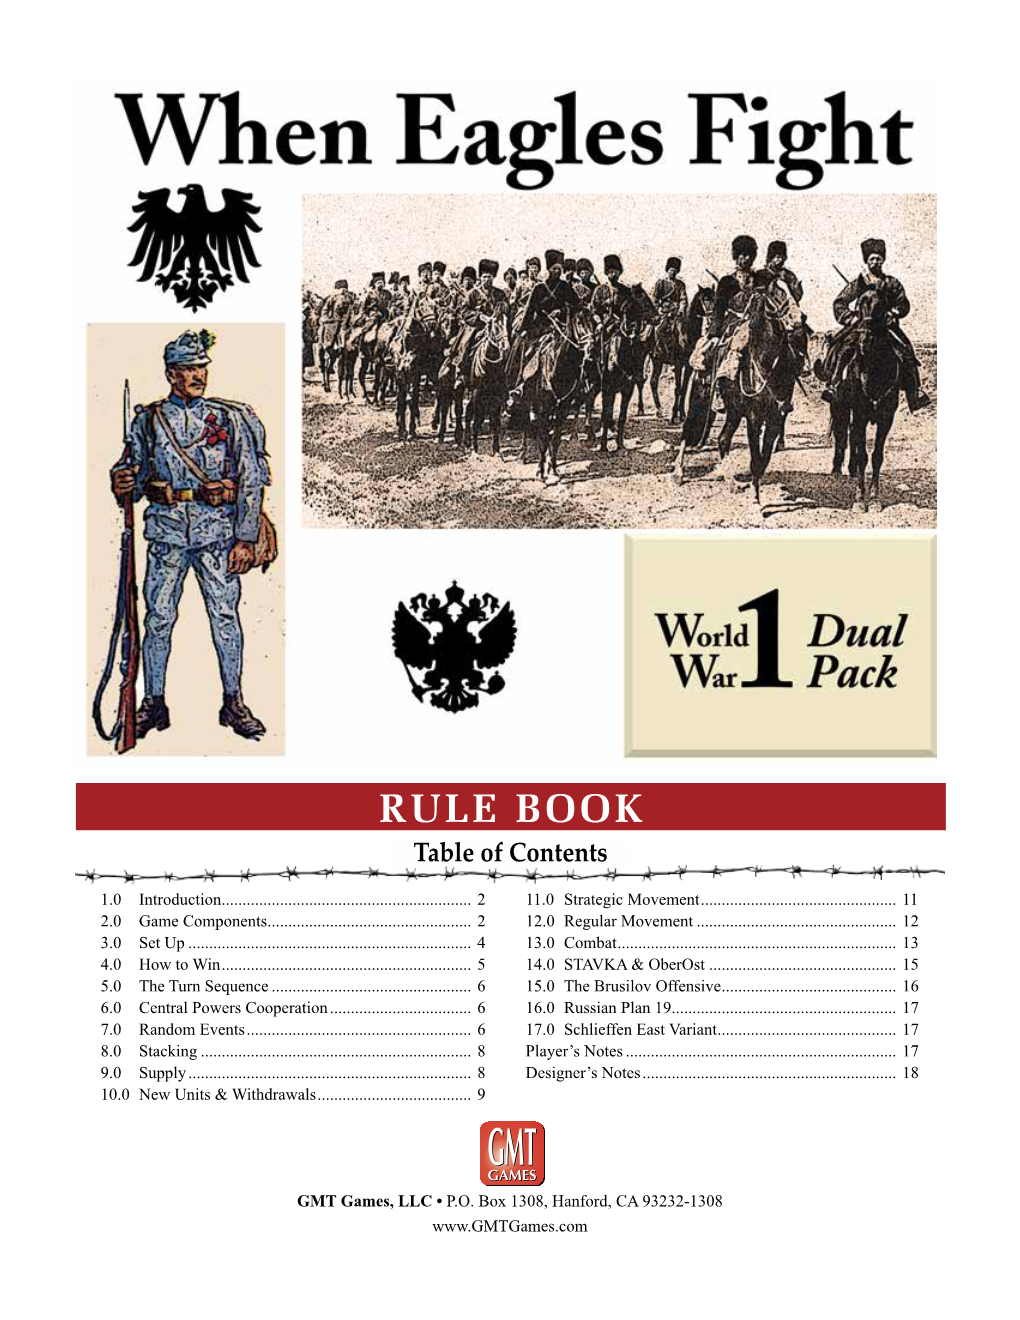 RULE BOOK Table of Contents